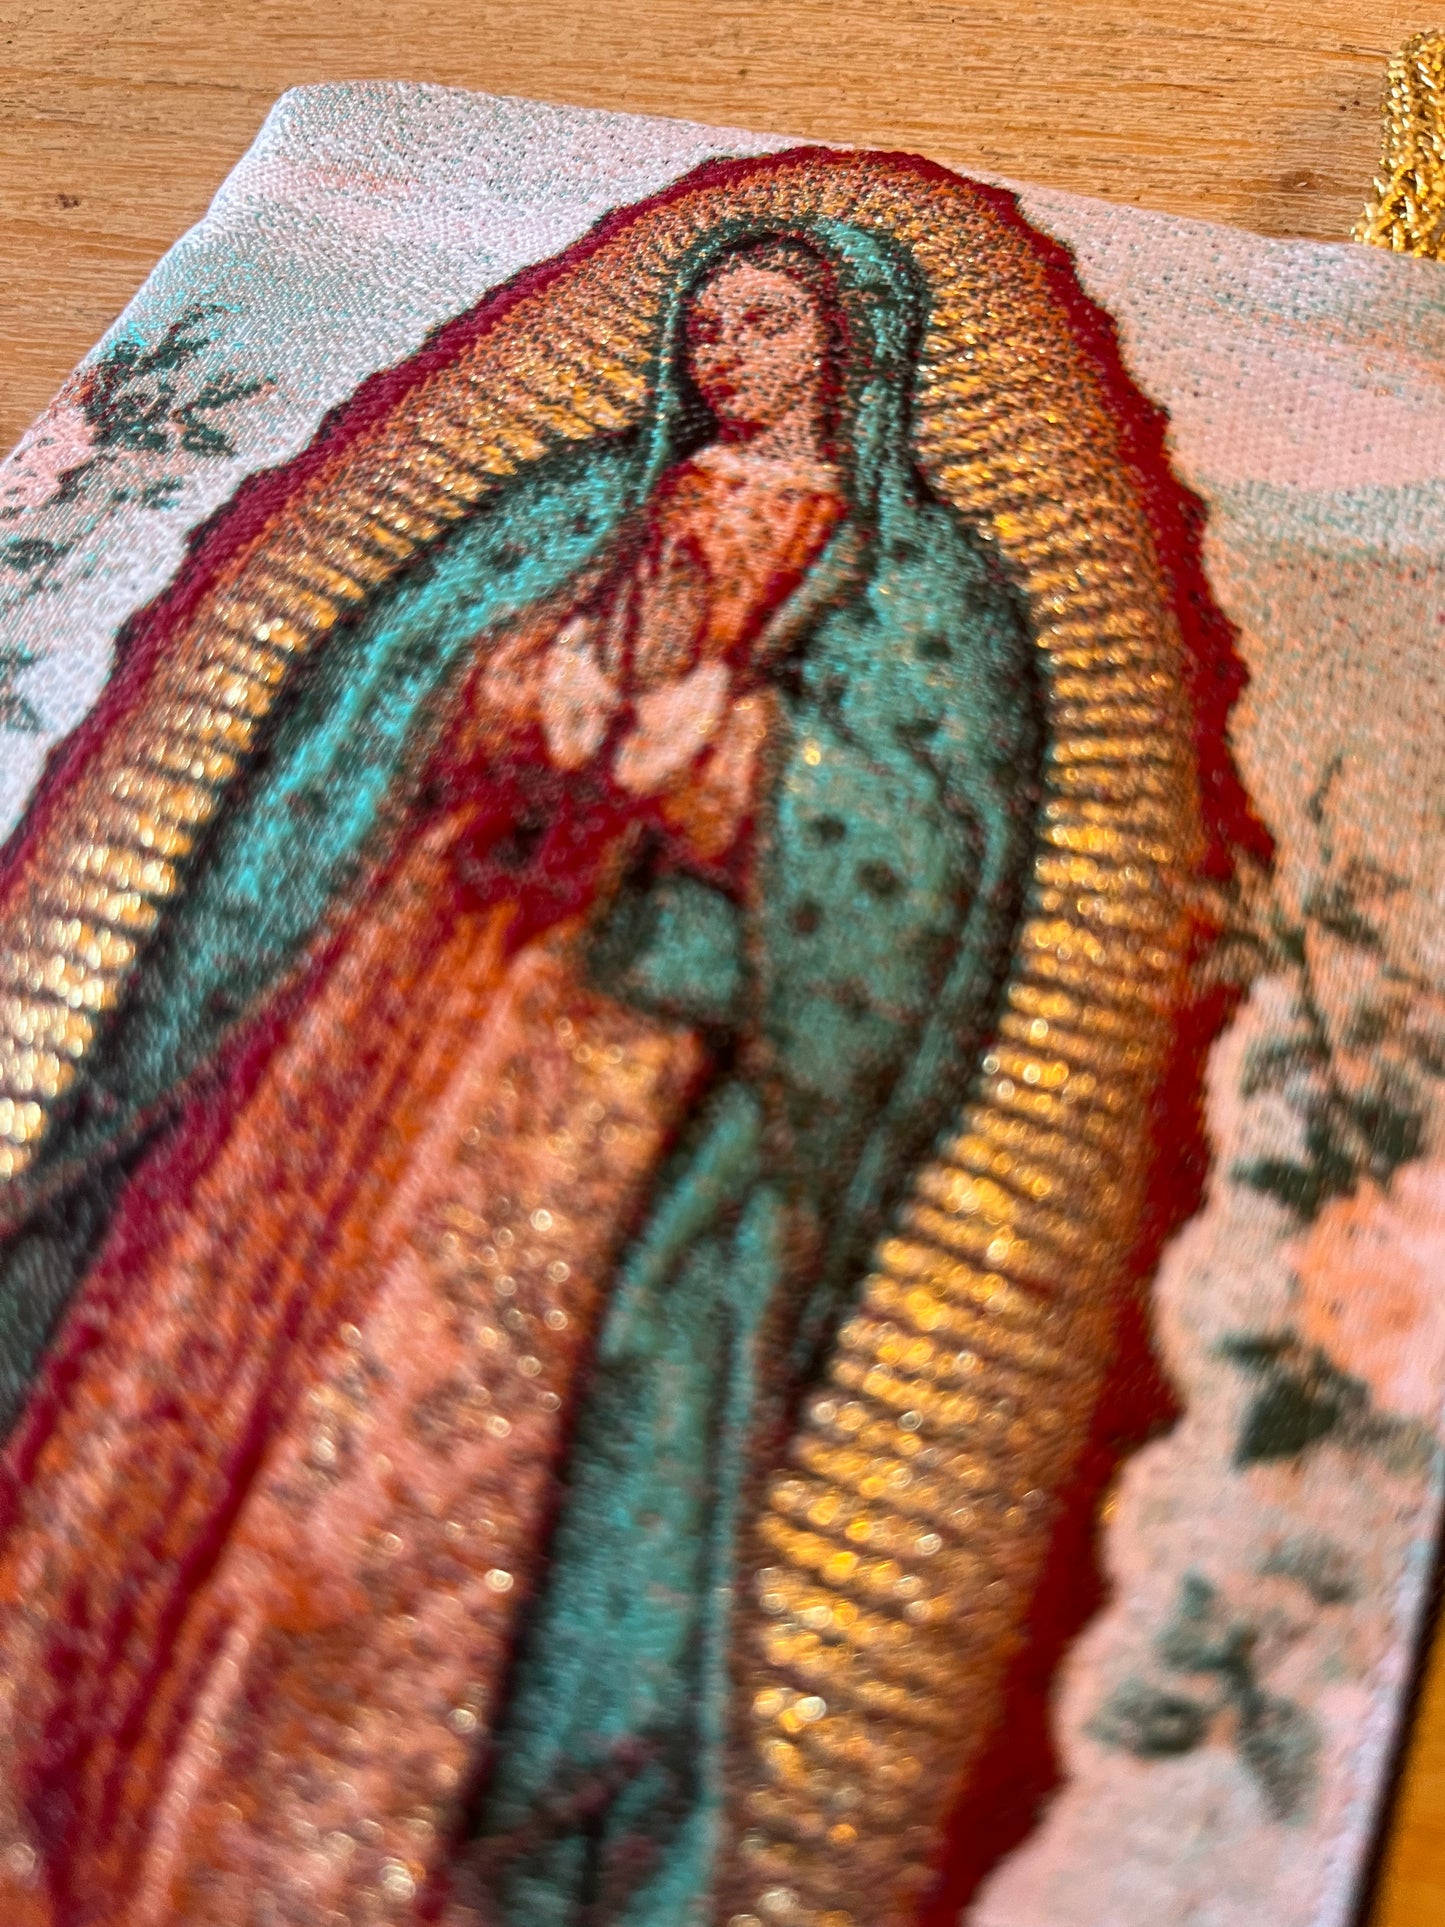 Our Lady of Guadalupe Rosary Pouch Bag